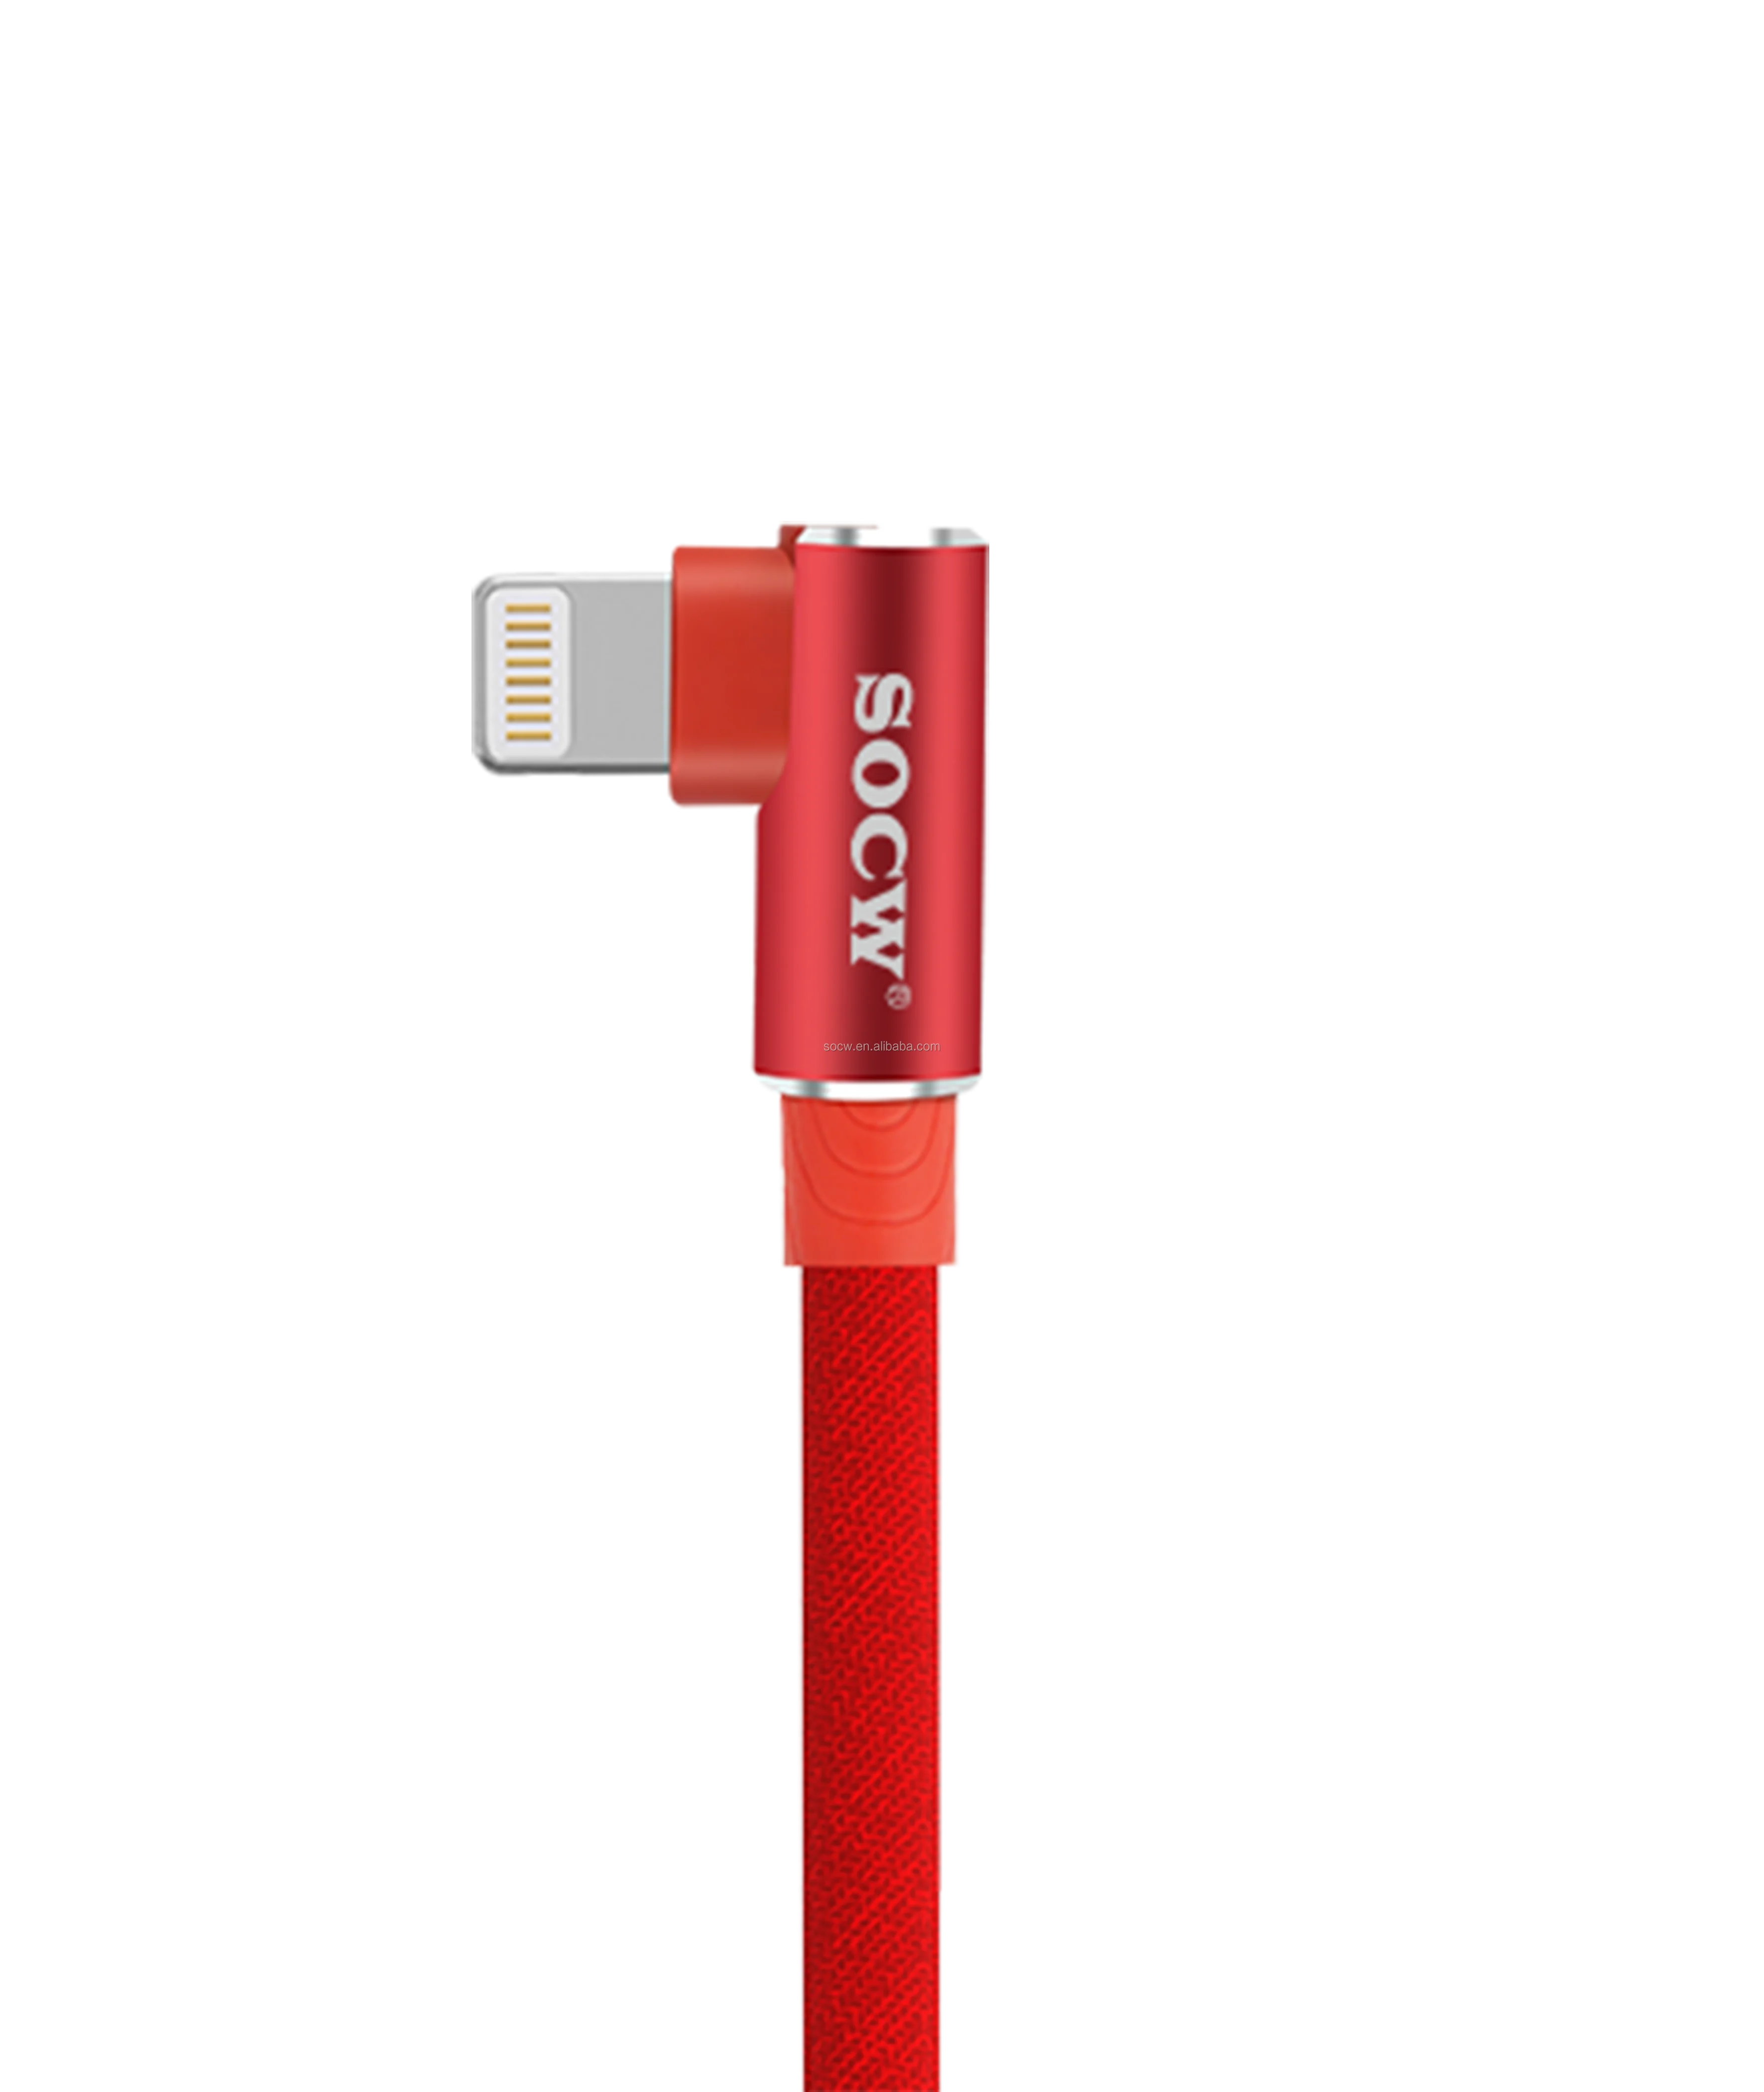 

New mould PVC 90 degrees elbow phone charging cable 1/2A 1M fast speed Micro usb right angle data chargig cable for phone, Customized color